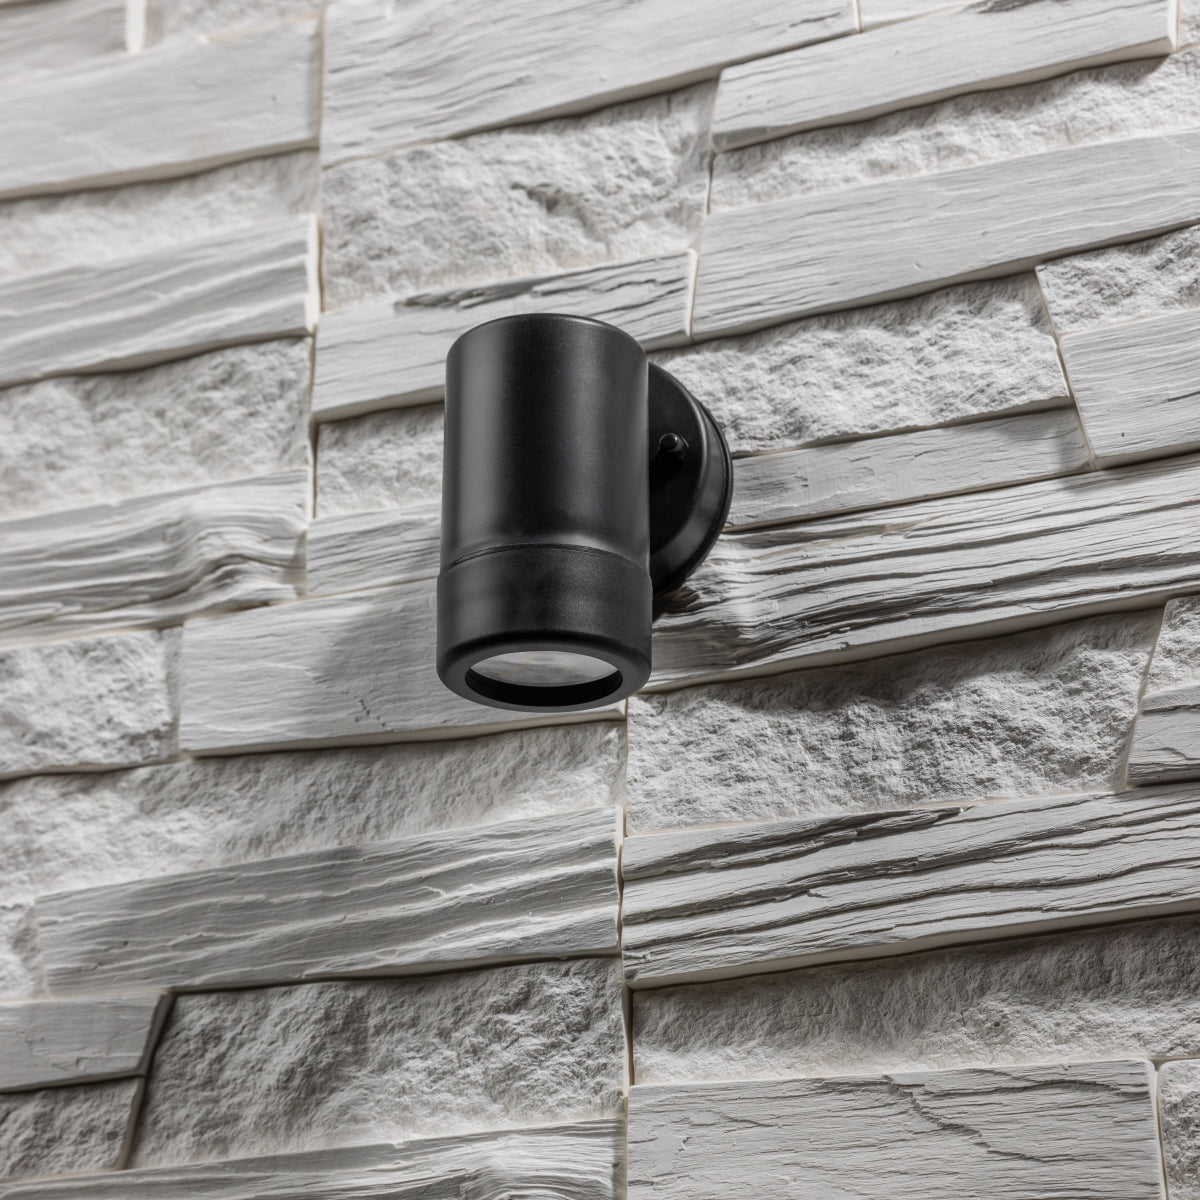 Our Valentine black outdoor single spot wall light would look perfect in a modern or more traditional home design. Outside wall lights can provide atmospheric light in your garden, at the front door or on the terrace as well as a great security solution. It is designed for durability and longevity with its robust material producing a fully weatherproof and water resistant light fitting